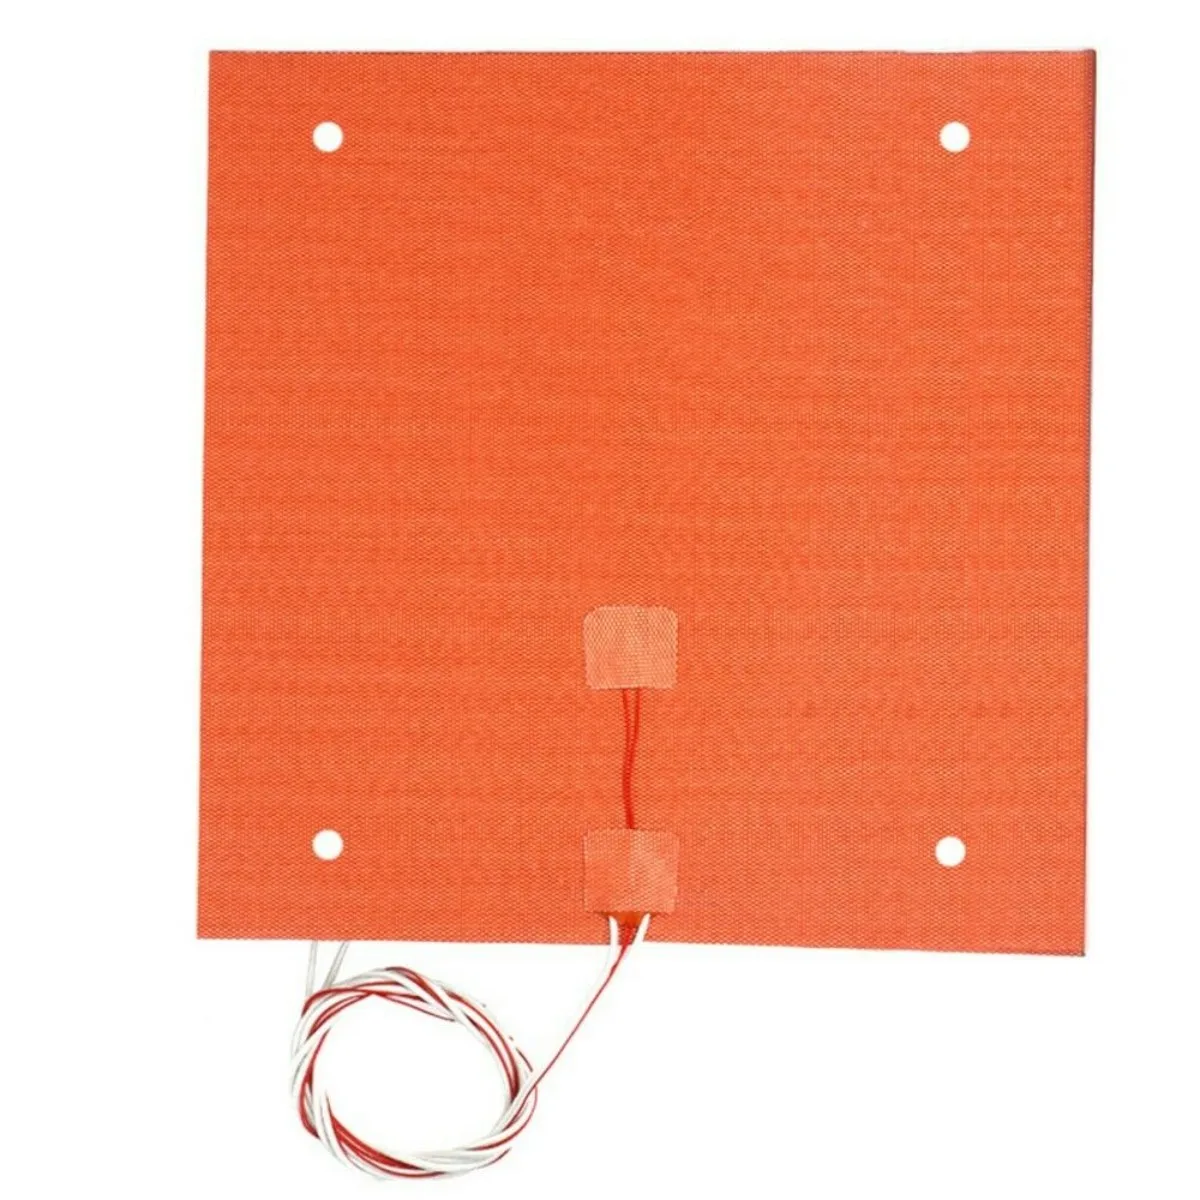 Silicone Heating Bed Heating Pad Waterproof 220/300x300/310/235/400 mm 12V/220/110 V for 3D printer Ender-3 cr10 Parts Hot Bed